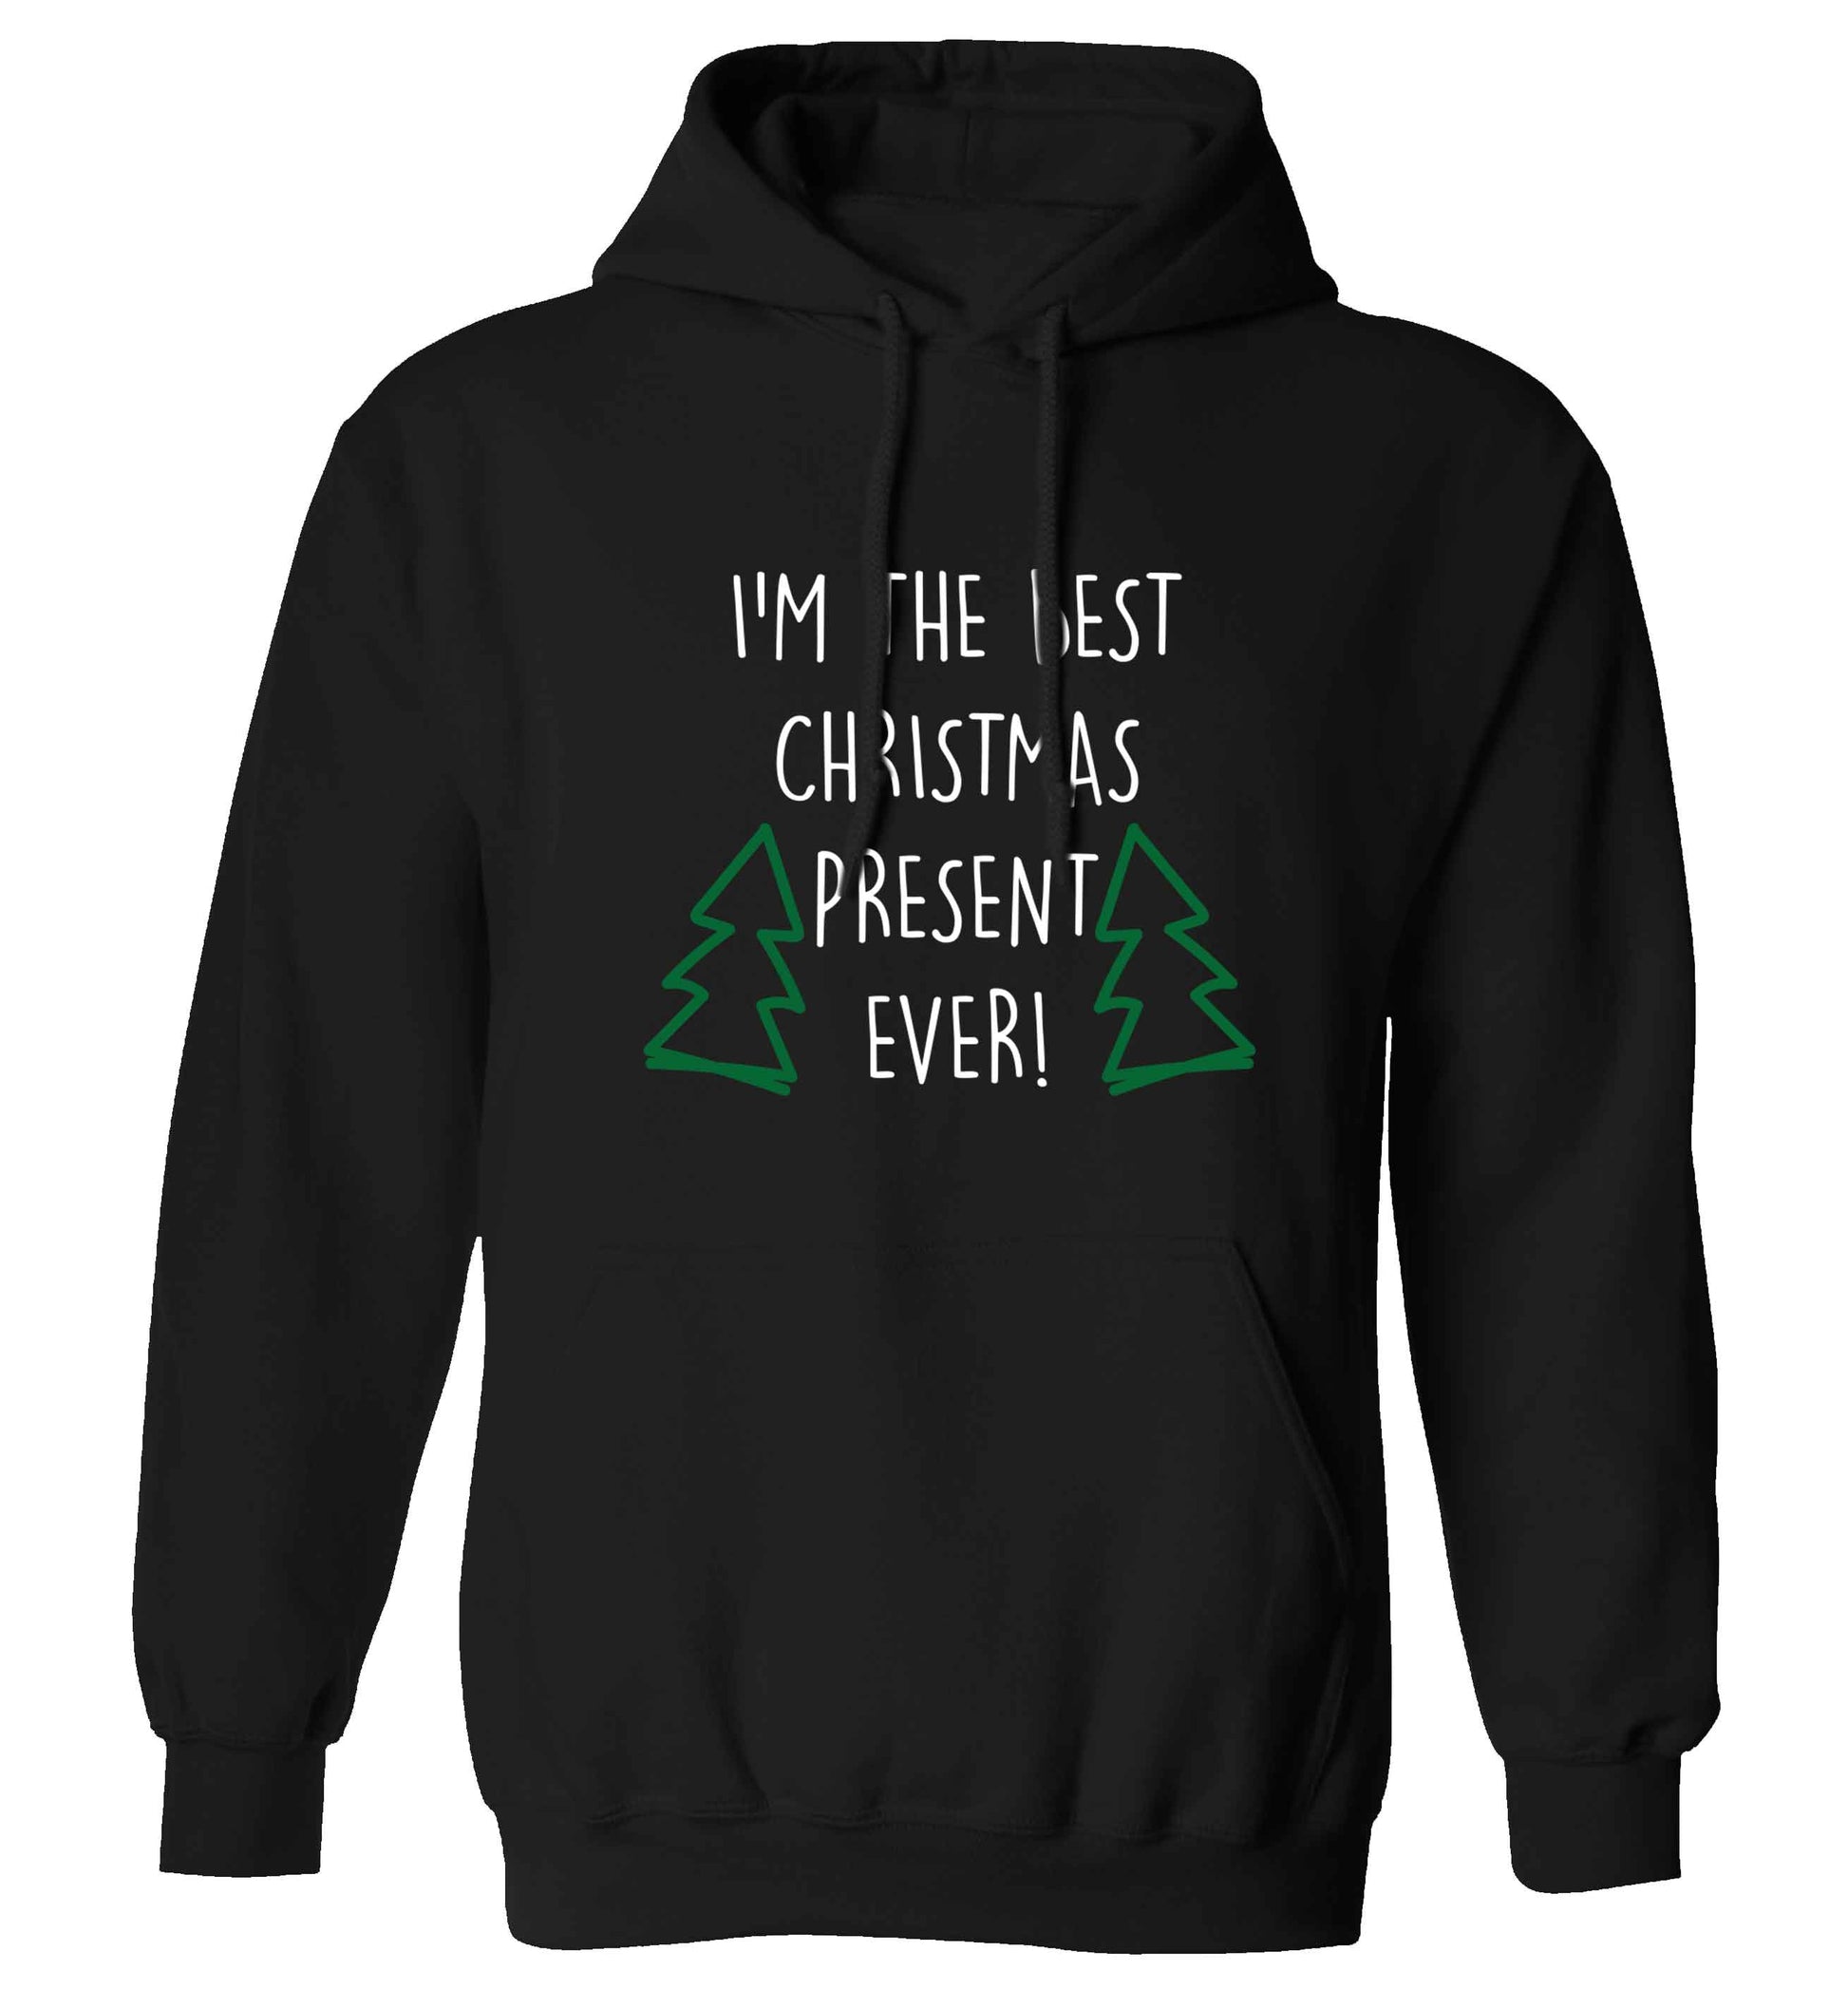 I'm the best Christmas present ever adults unisex black hoodie 2XL